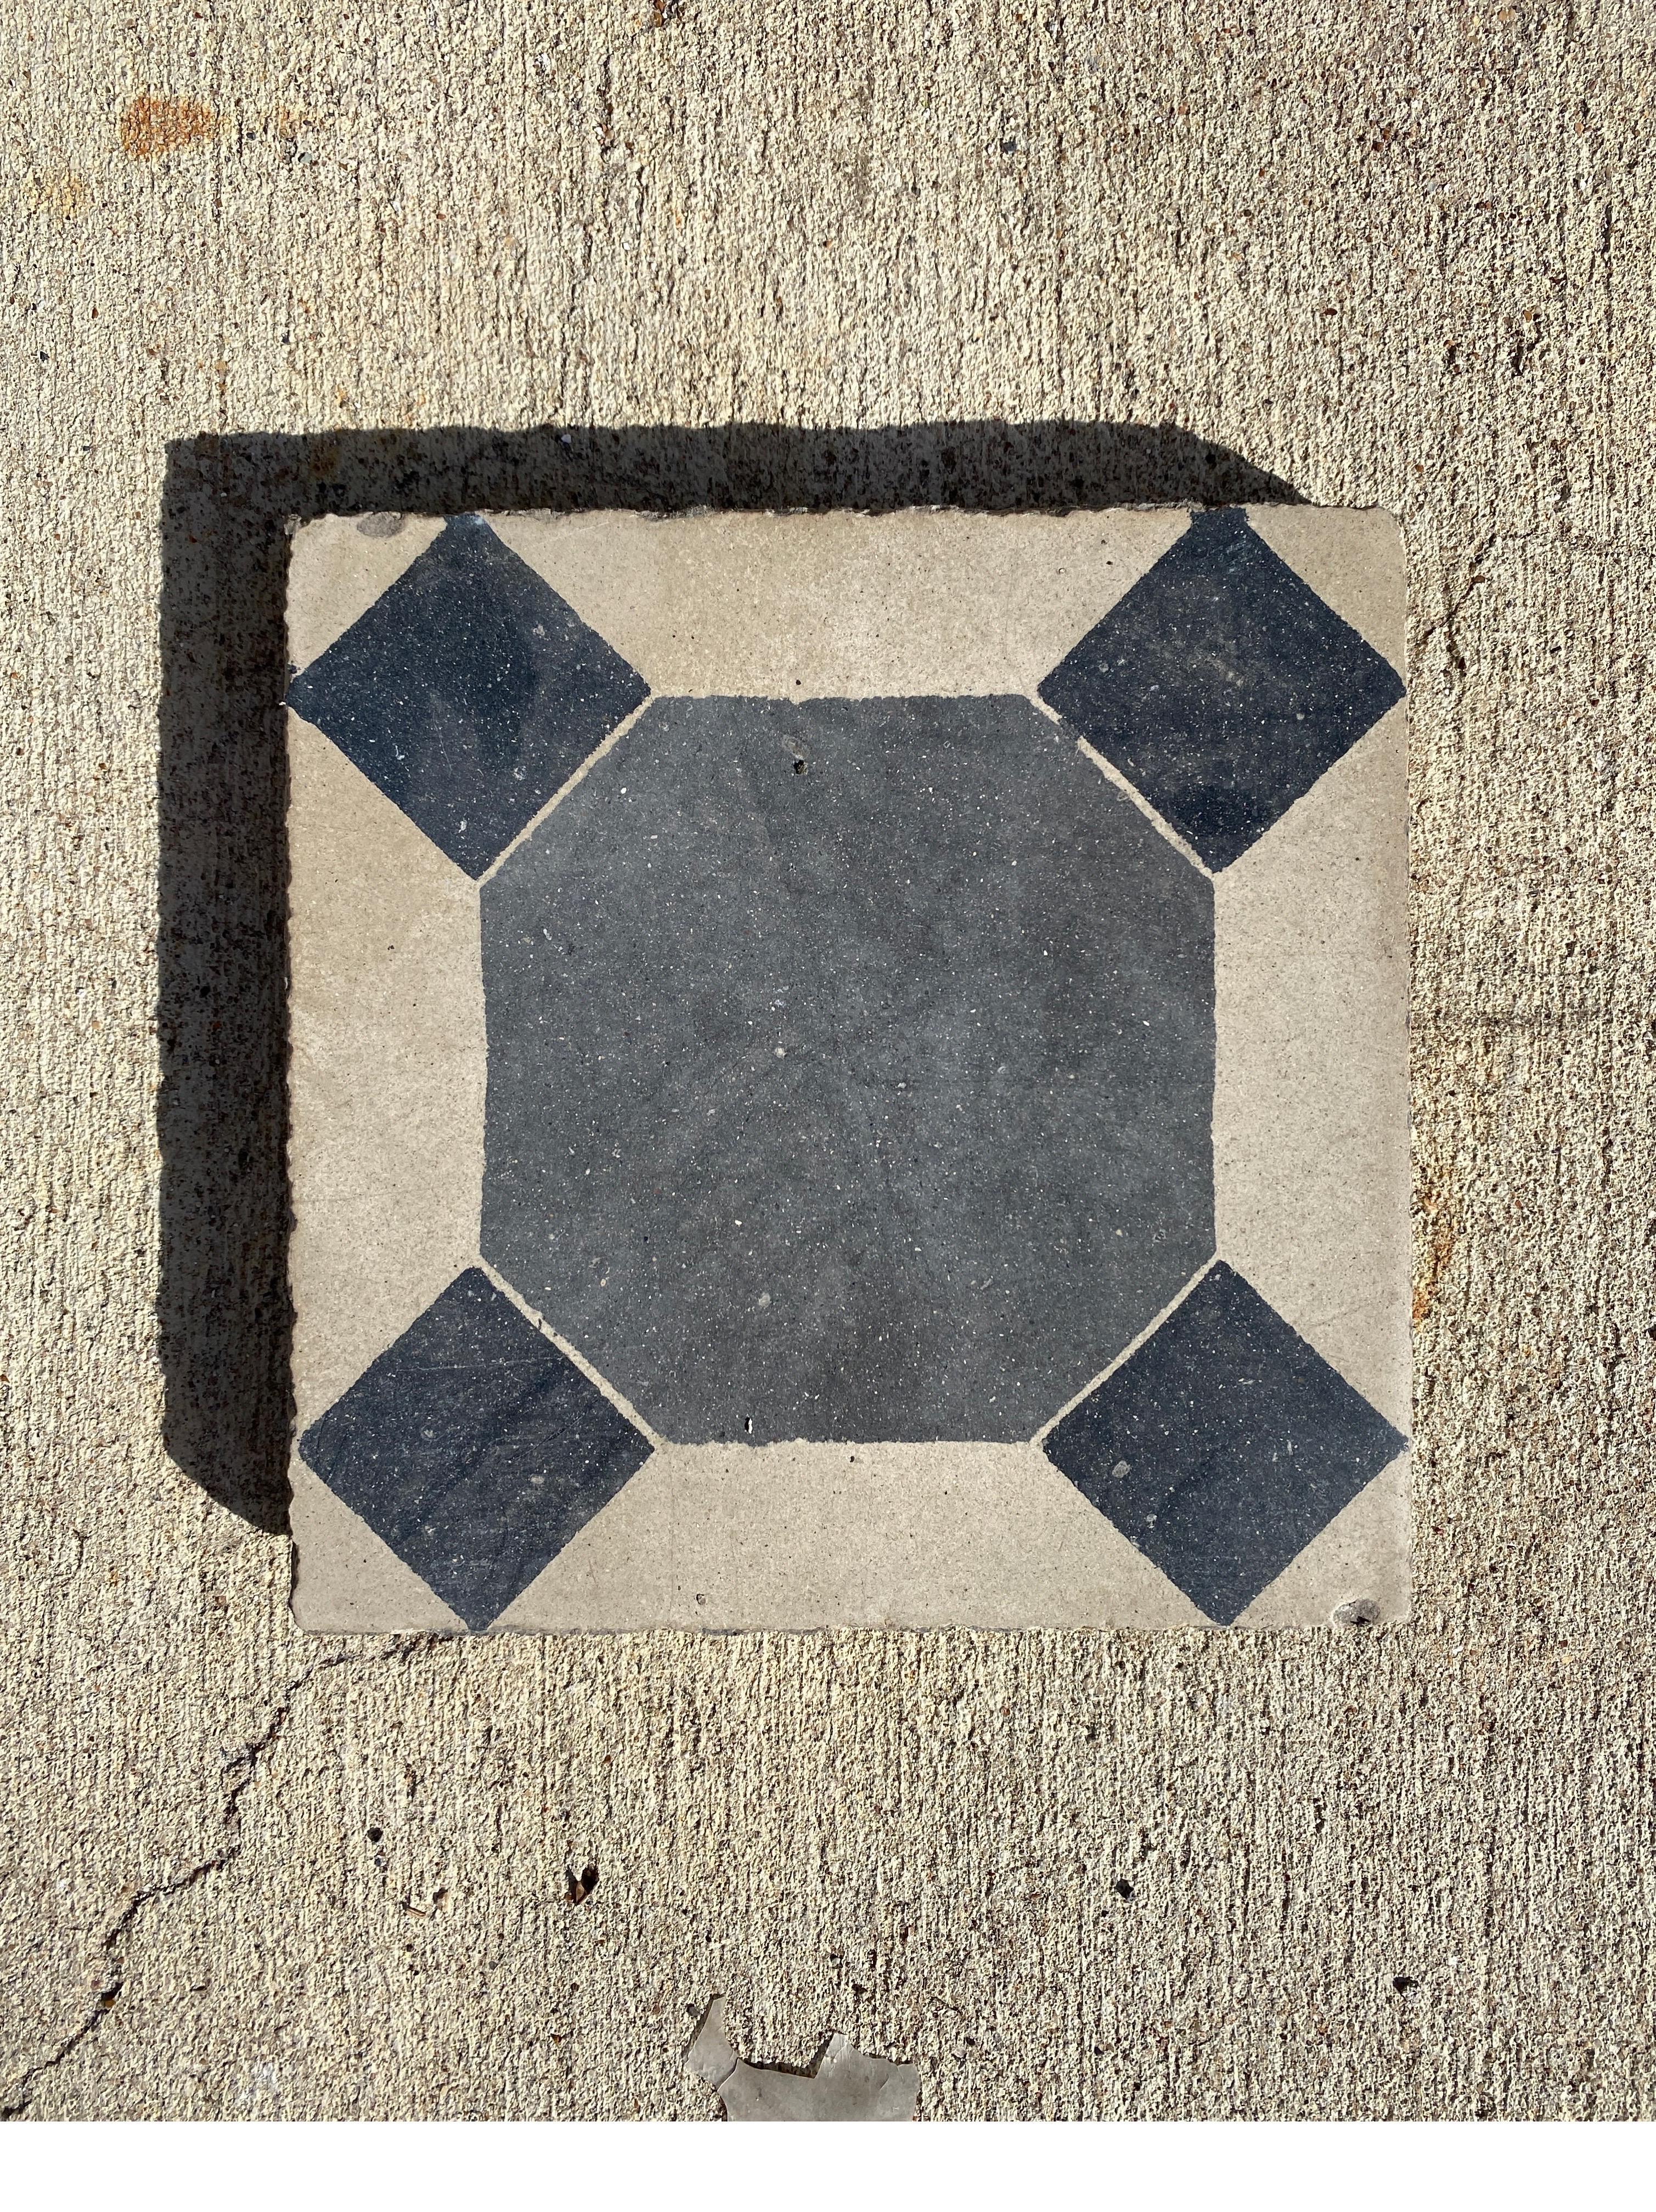 Beautiful black and tan encaustic tiles.

We have a lot of 190 square ft.